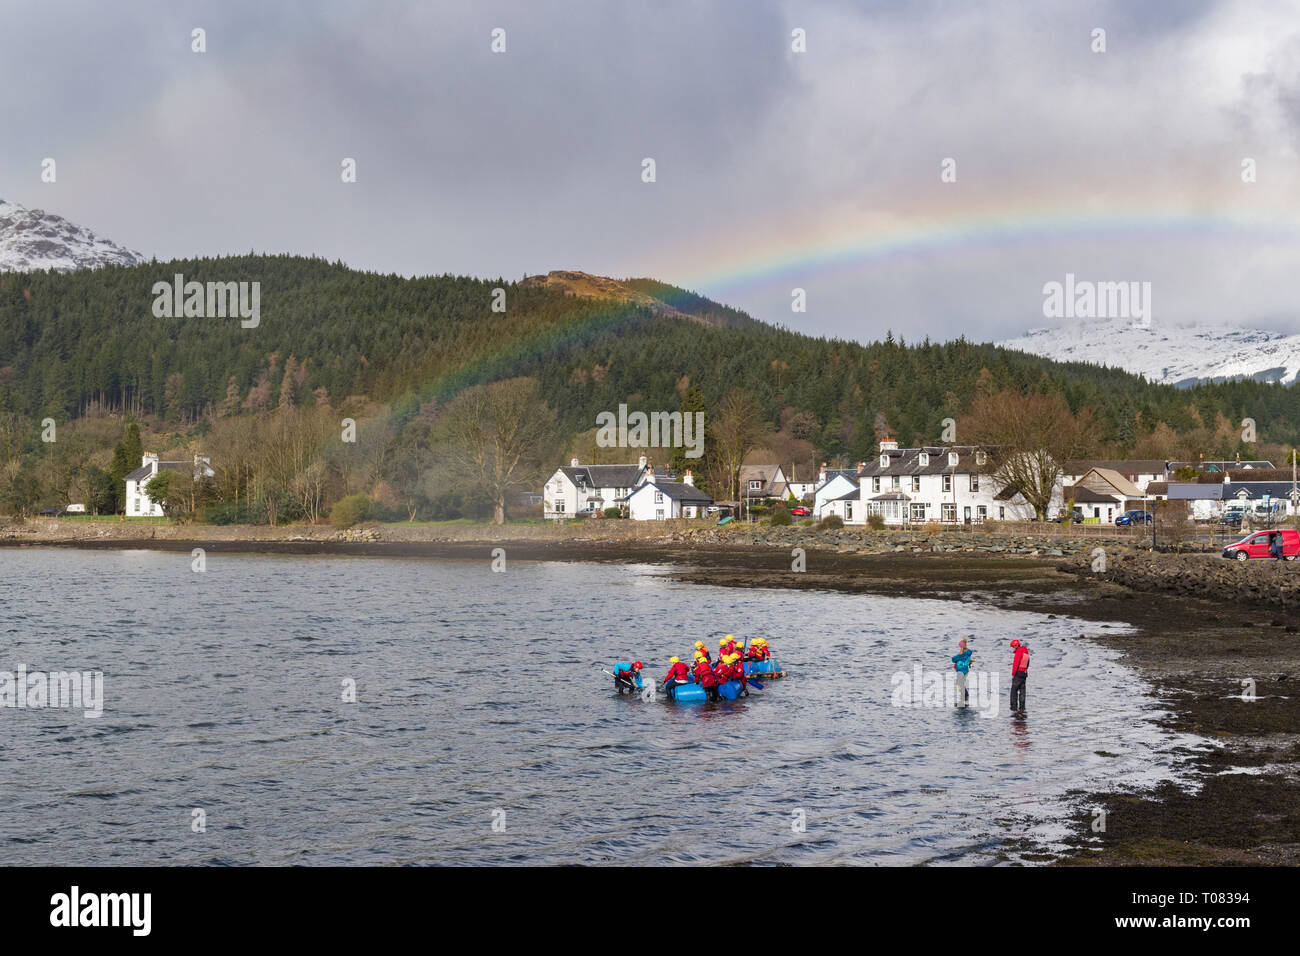 Lochgoilhead, Argyll and Bute, Scotland - young people braving the chilly waters of Loch Goil underneath a rainbow during raft building activity Stock Photo